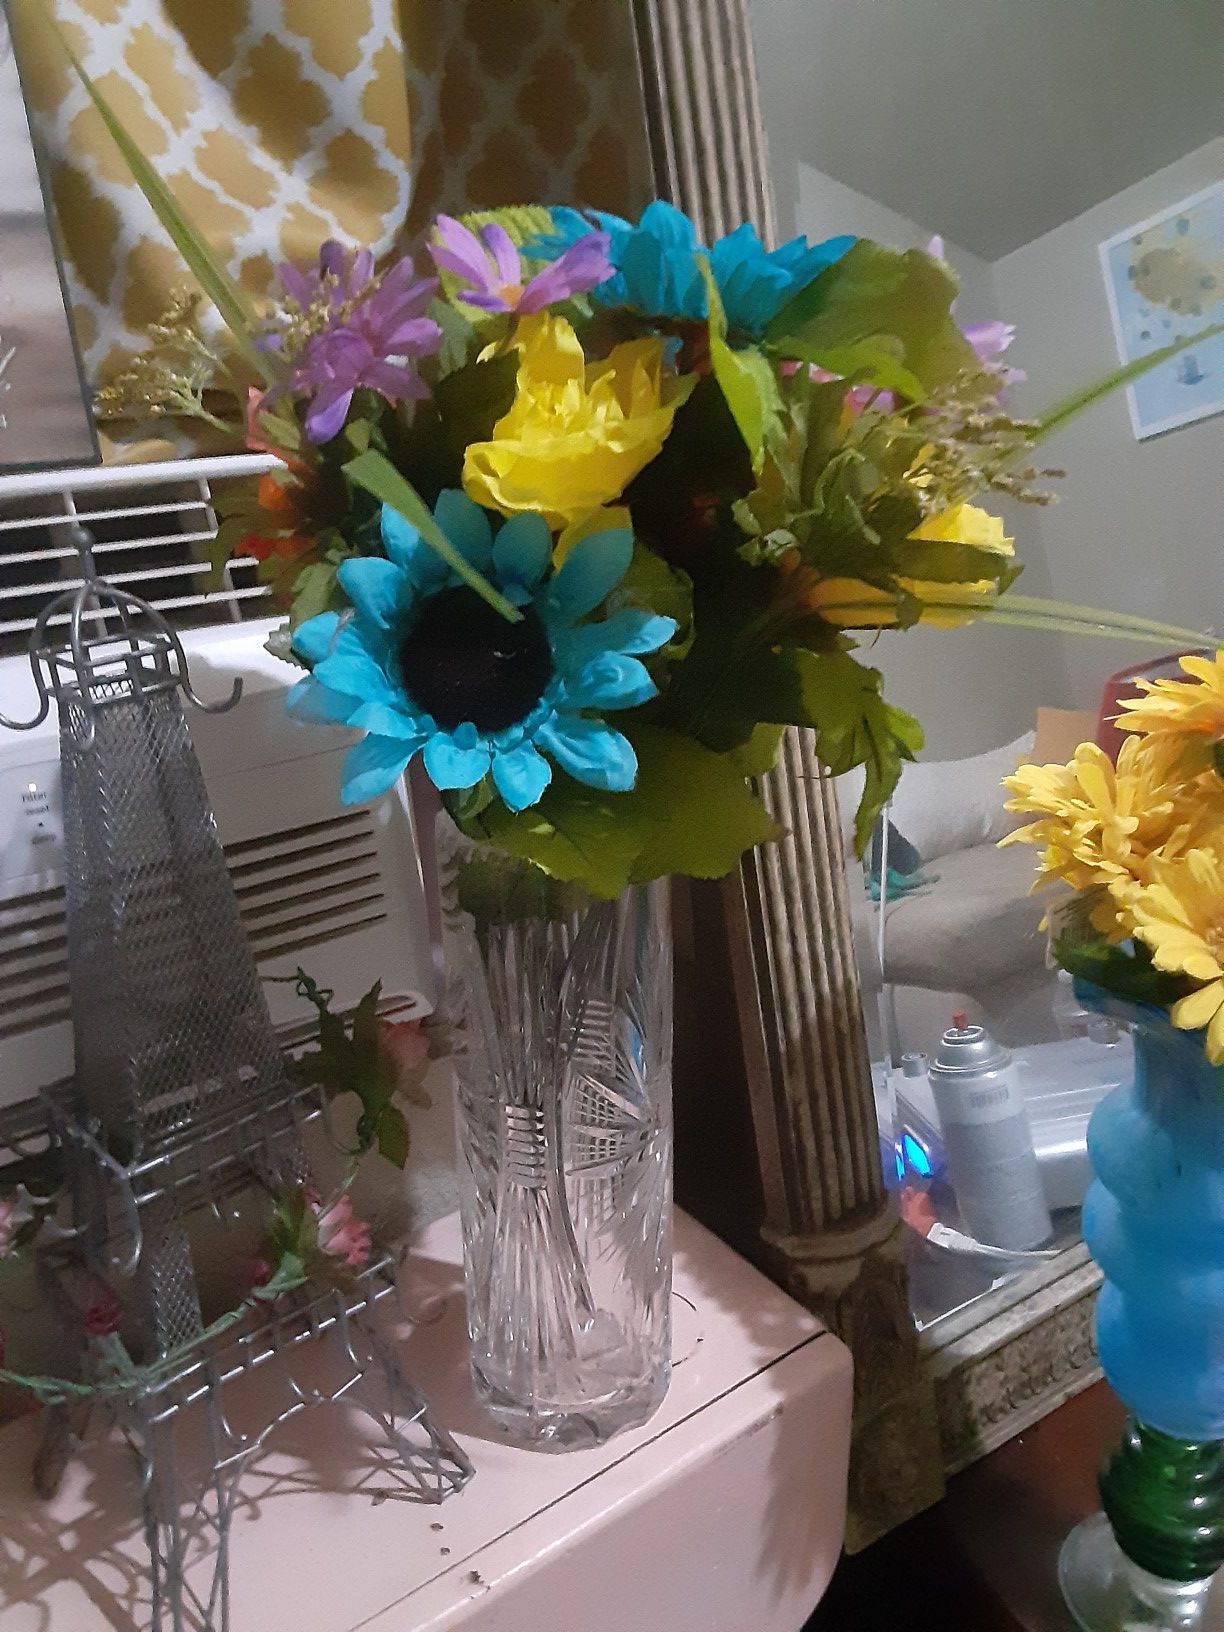 Glass vase & flowers $ 18.00 cash only (serious buyers)